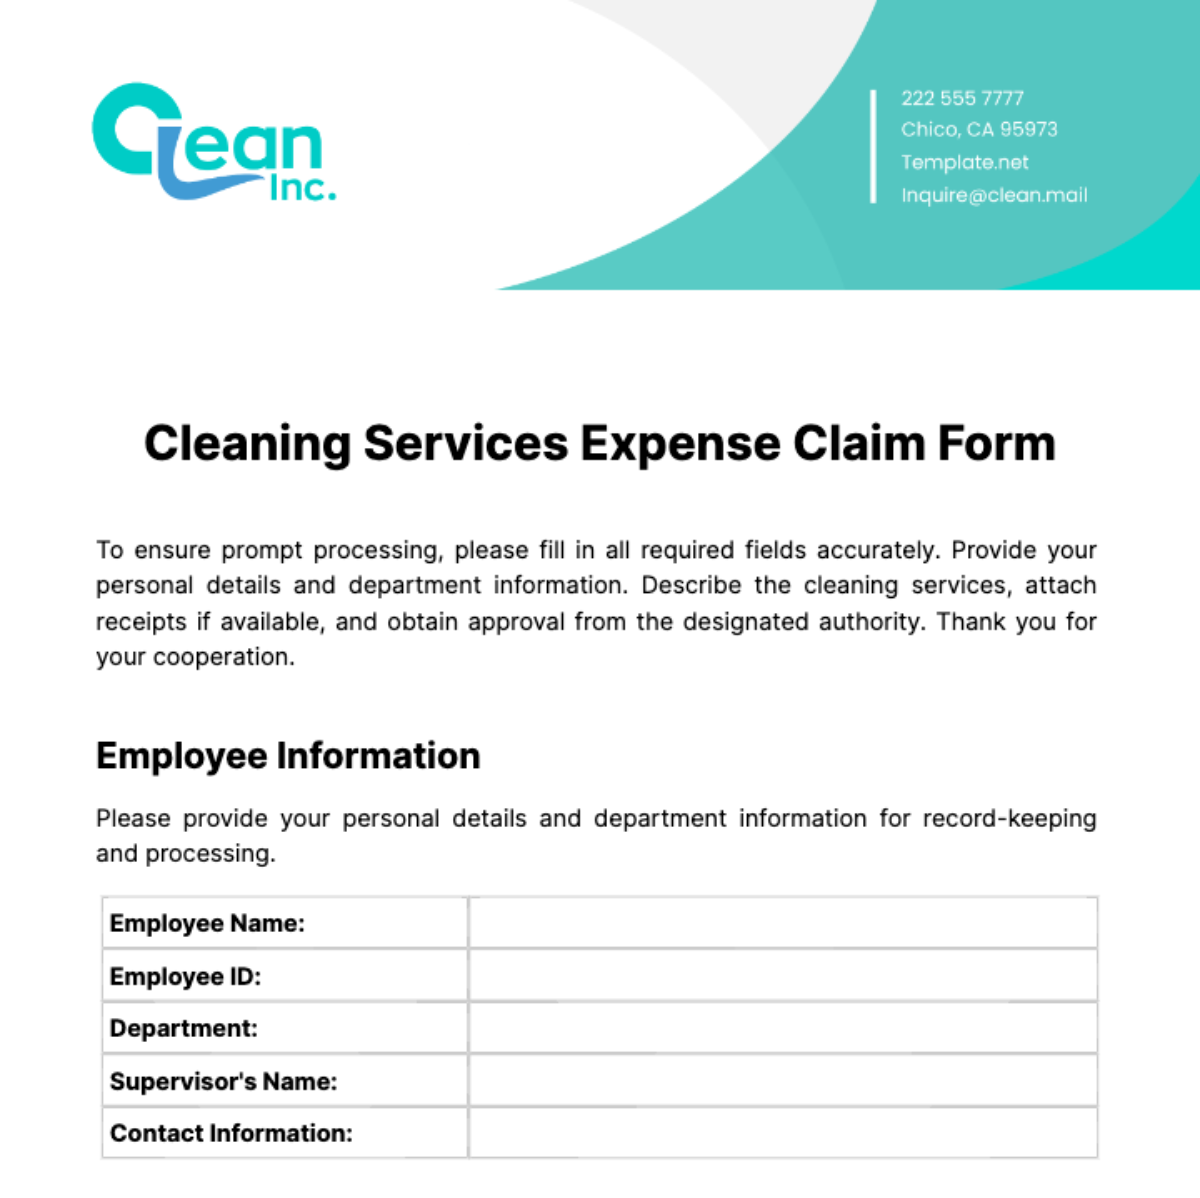 Cleaning Services Expense Claim Form Template